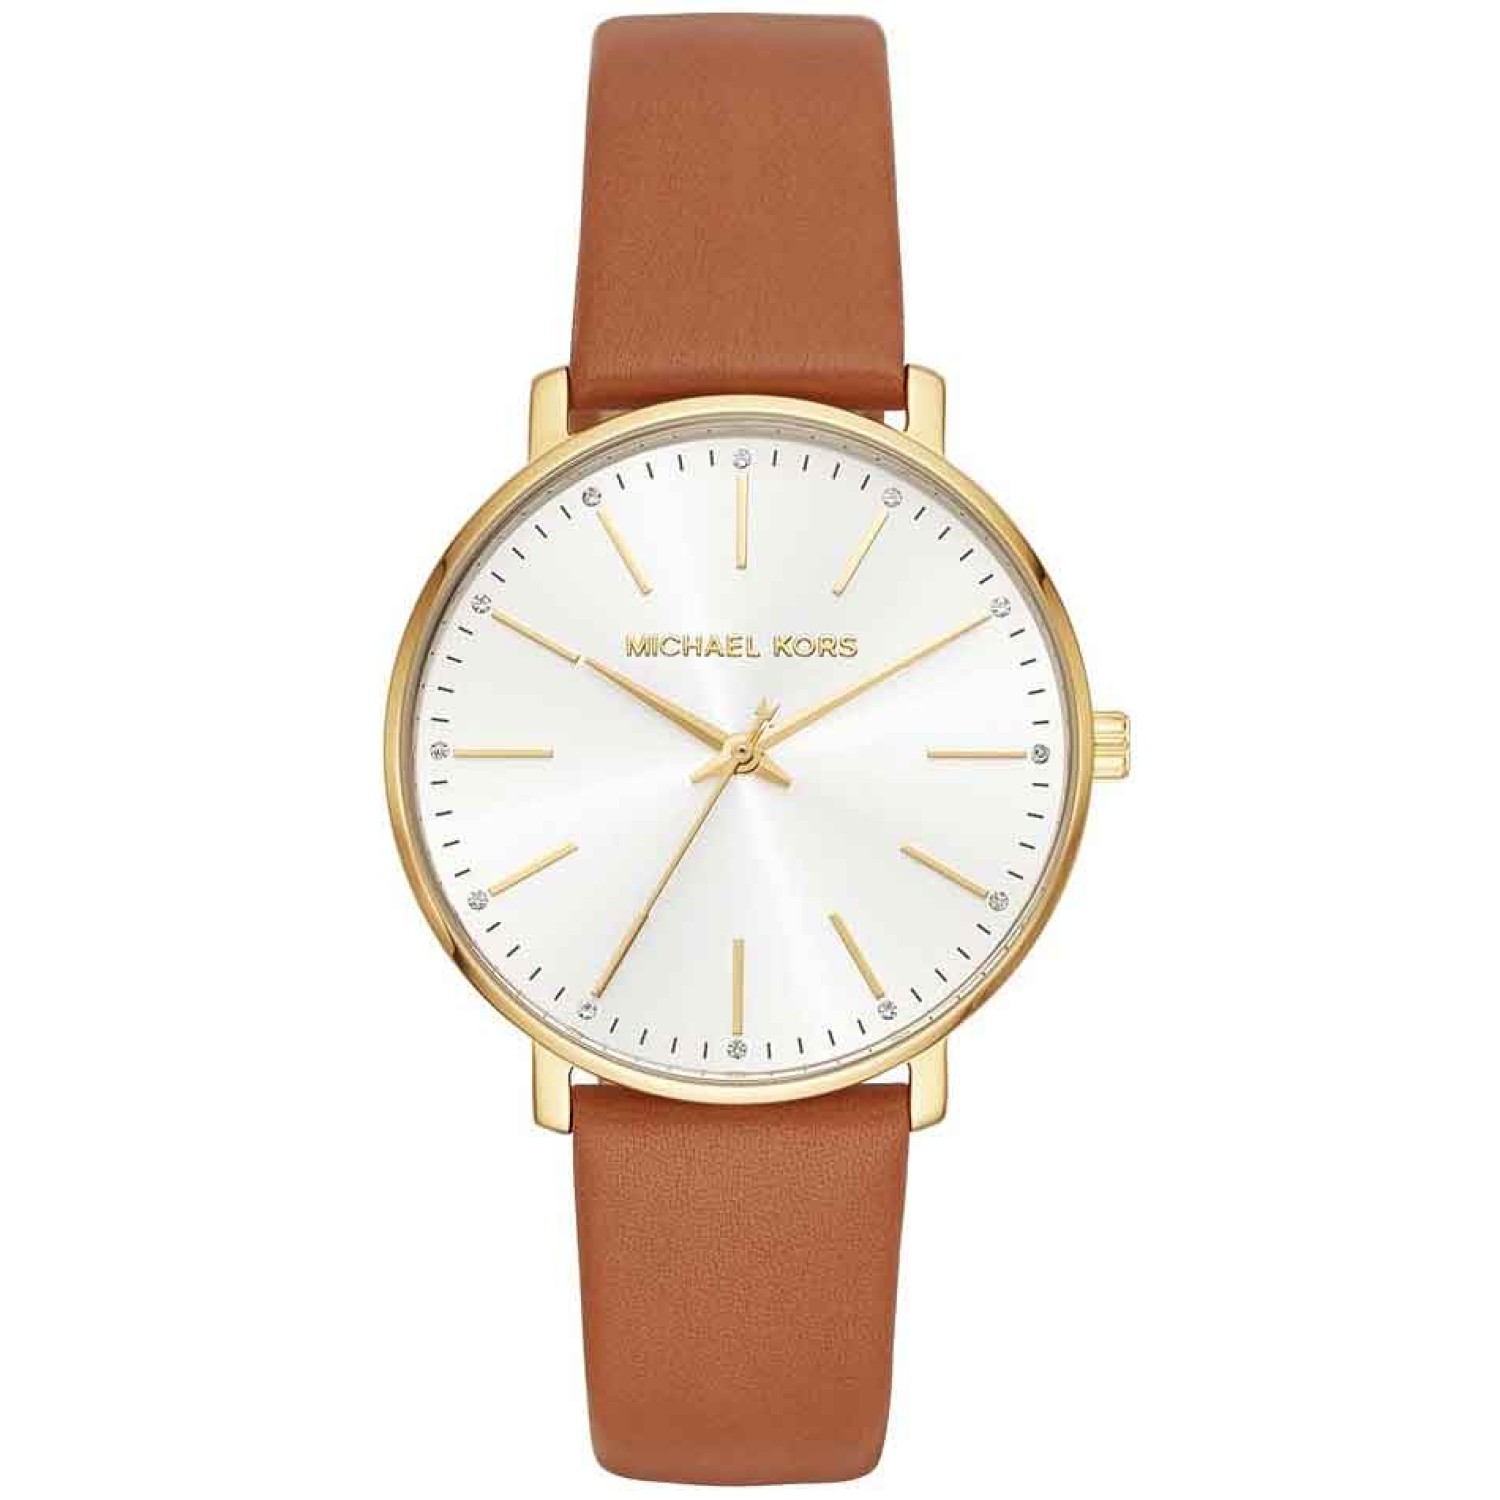 MK2740 Michael Kors Pyper Watch. Ladies Only Time watch By Michael Kors from the Pyper Collection. Model With Round Case In Stainless Steel Silver Colour And Glossy Finish.   Humm -Buy Little things up to $1000 and choose 10 weekly or @christies.online